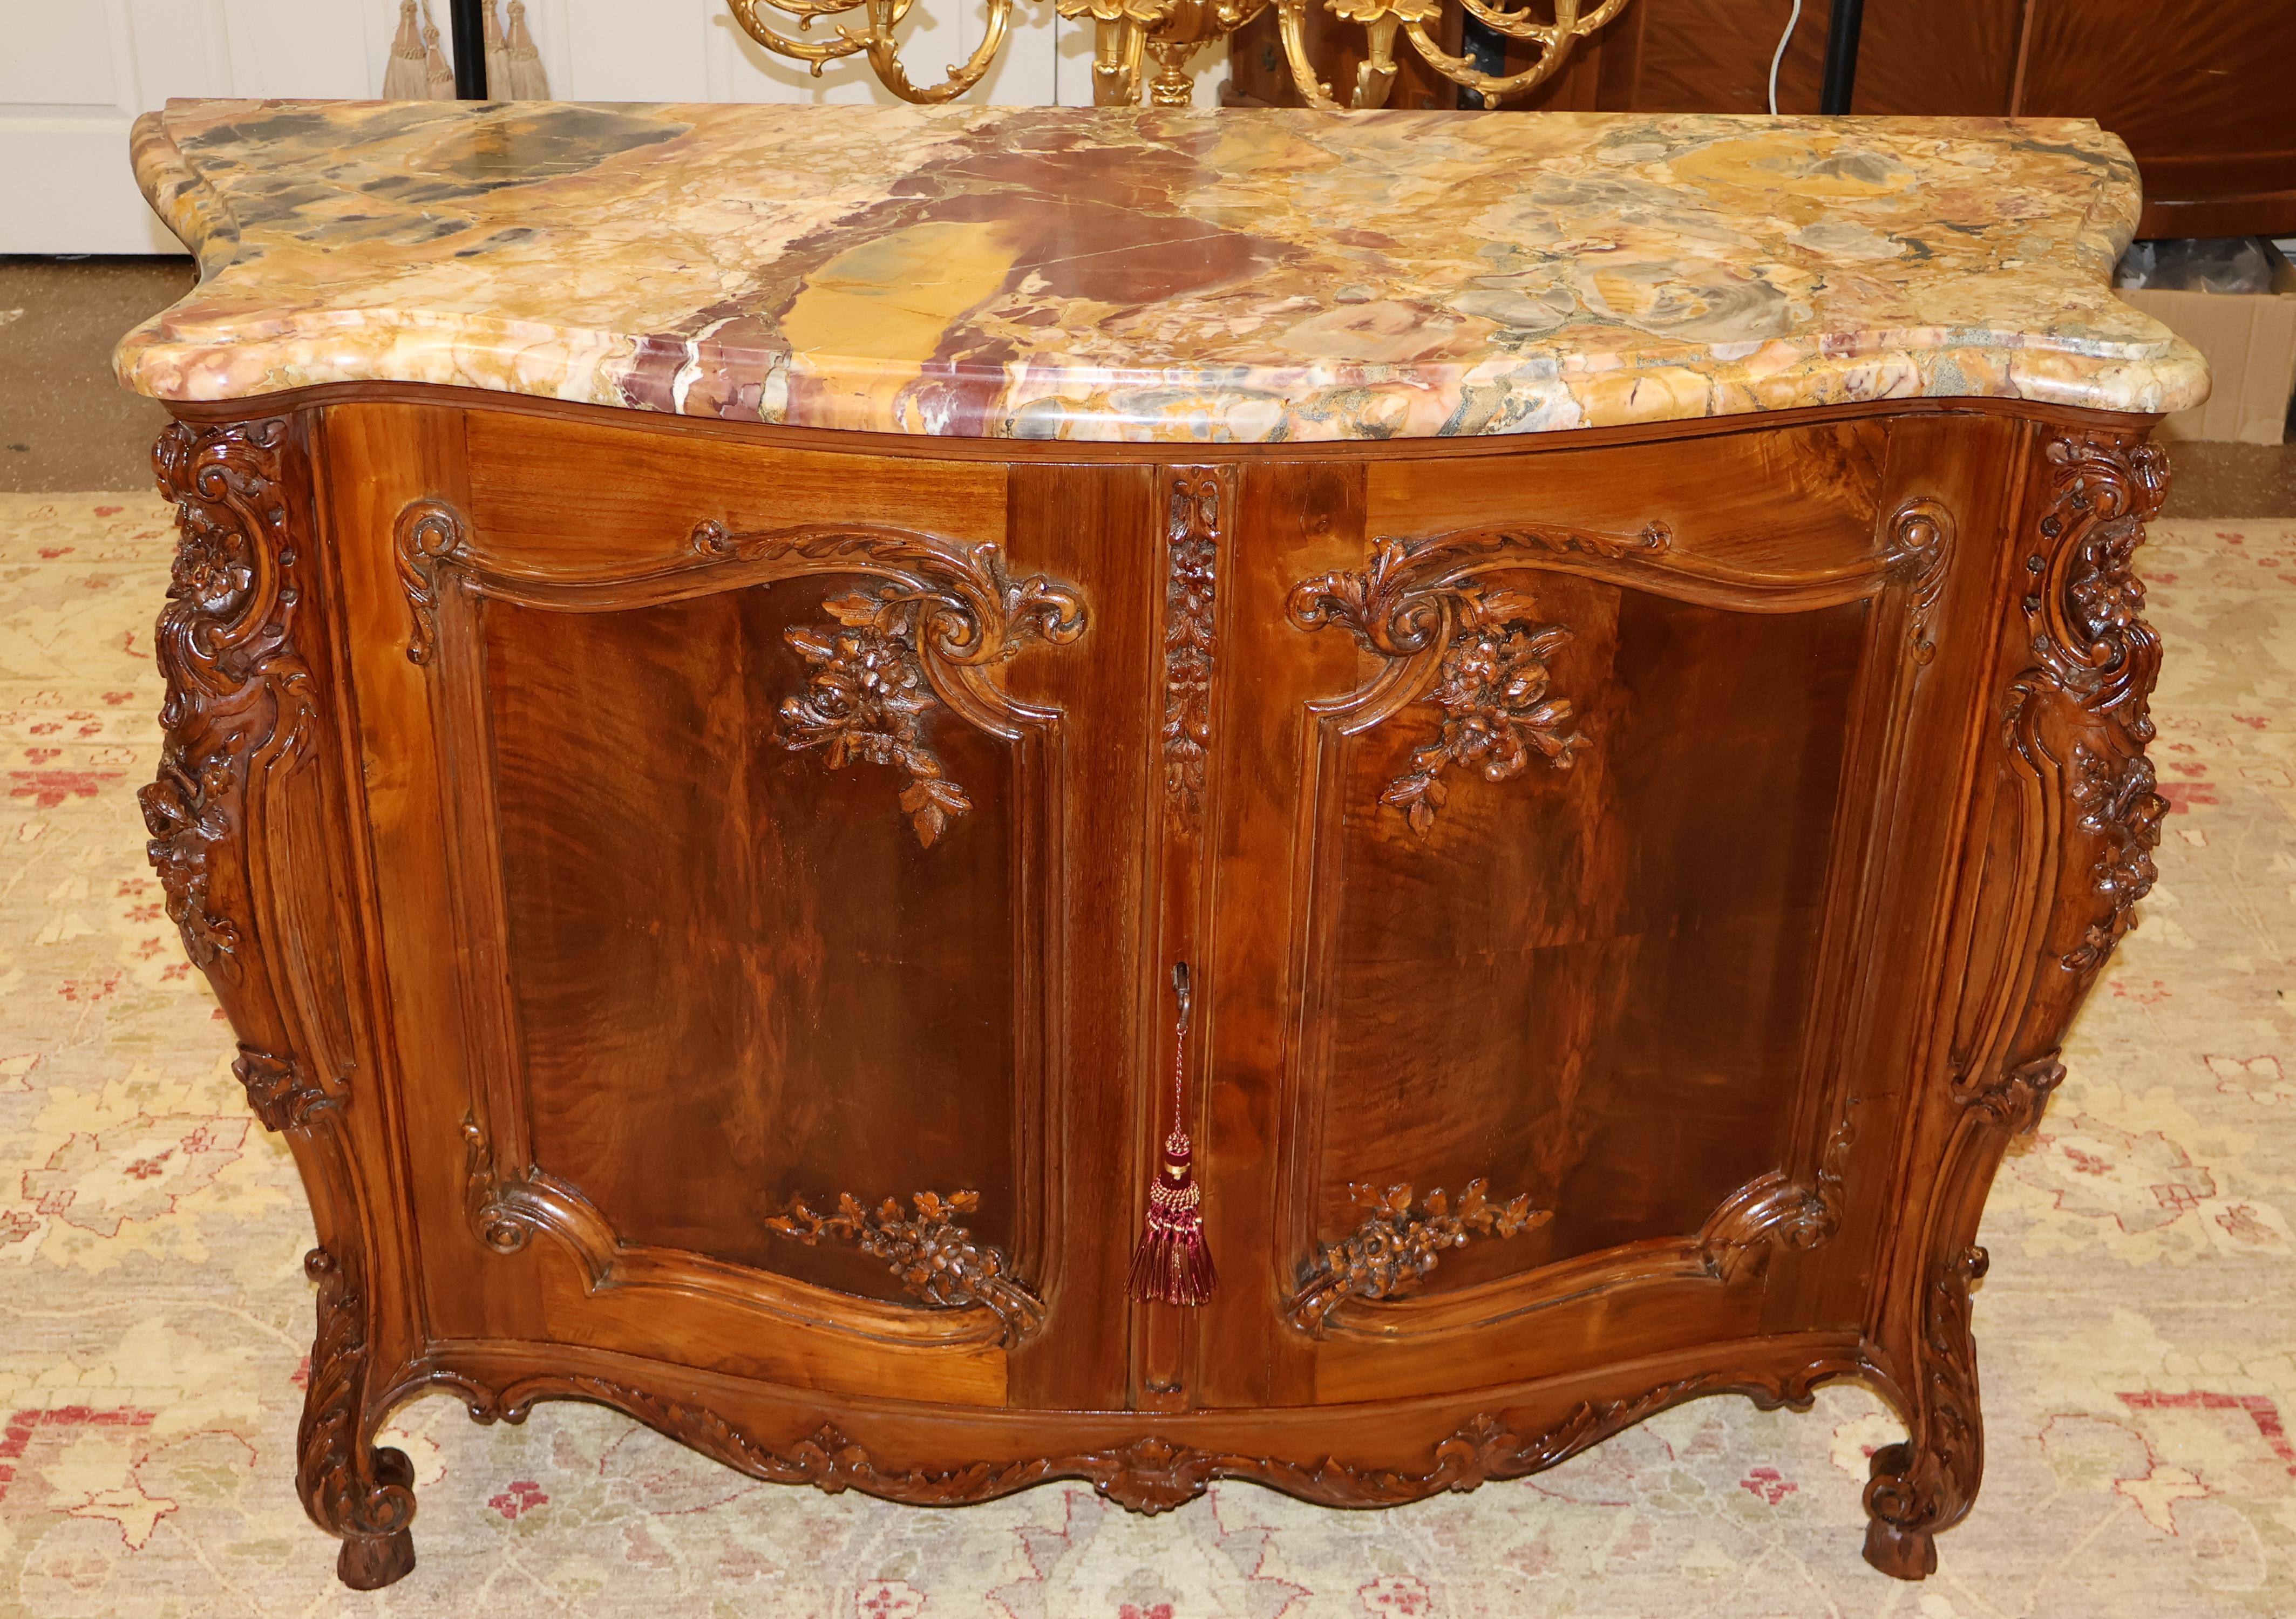 French Marble Top Louis XV Style Carved Circassian Walnut Buffet Chest Commode

Dimensions : 55